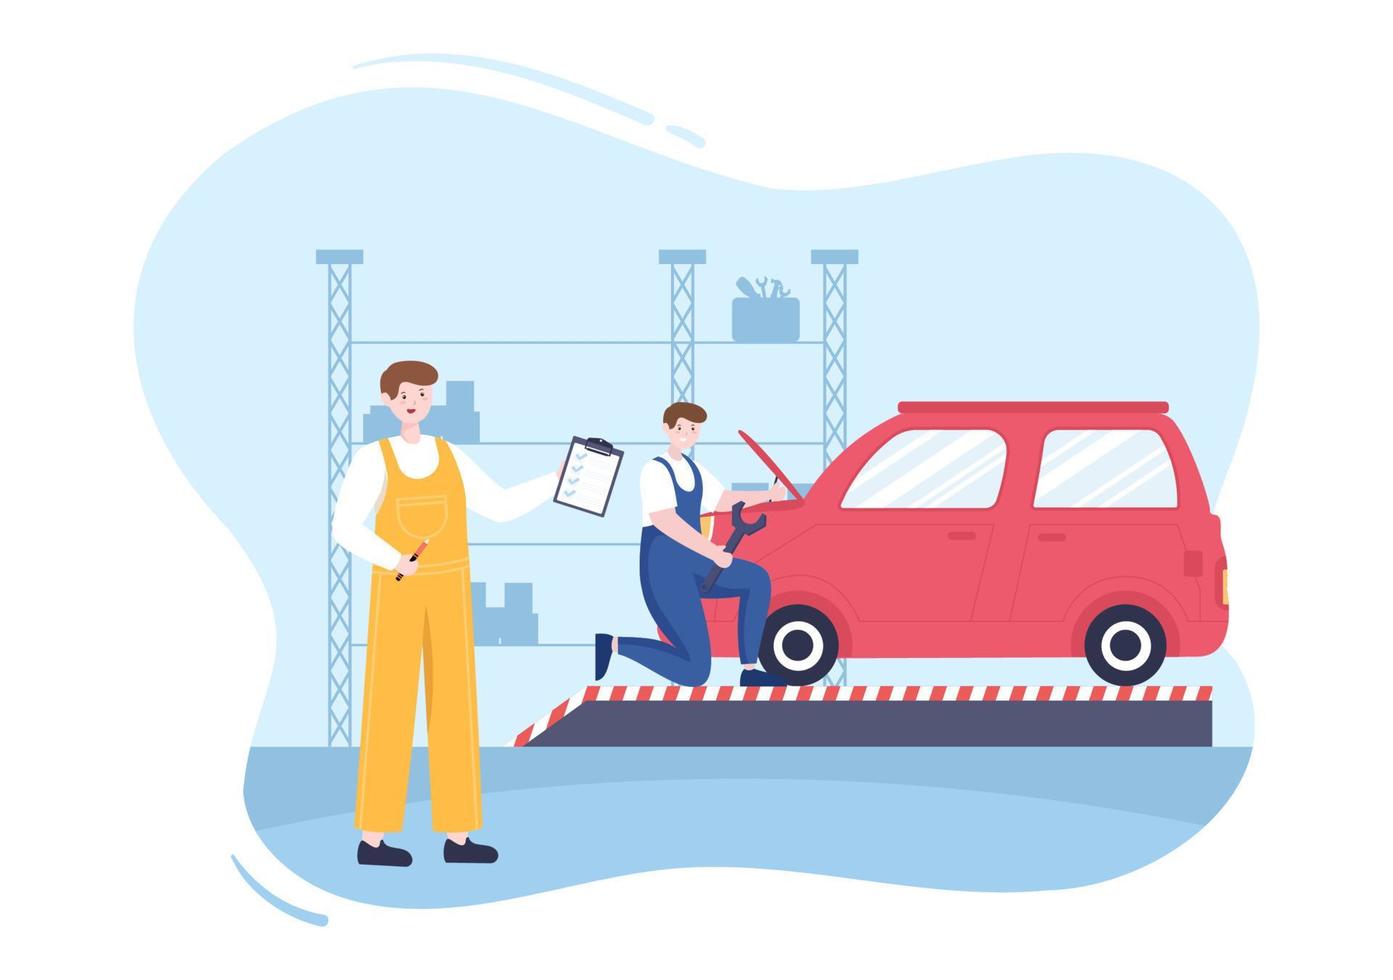 Car Inspection of The Station Detects Faults, Draws up a Checklist of All Breakdowns, Repair and Analysis Transport in Flat Cartoon Illustration vector